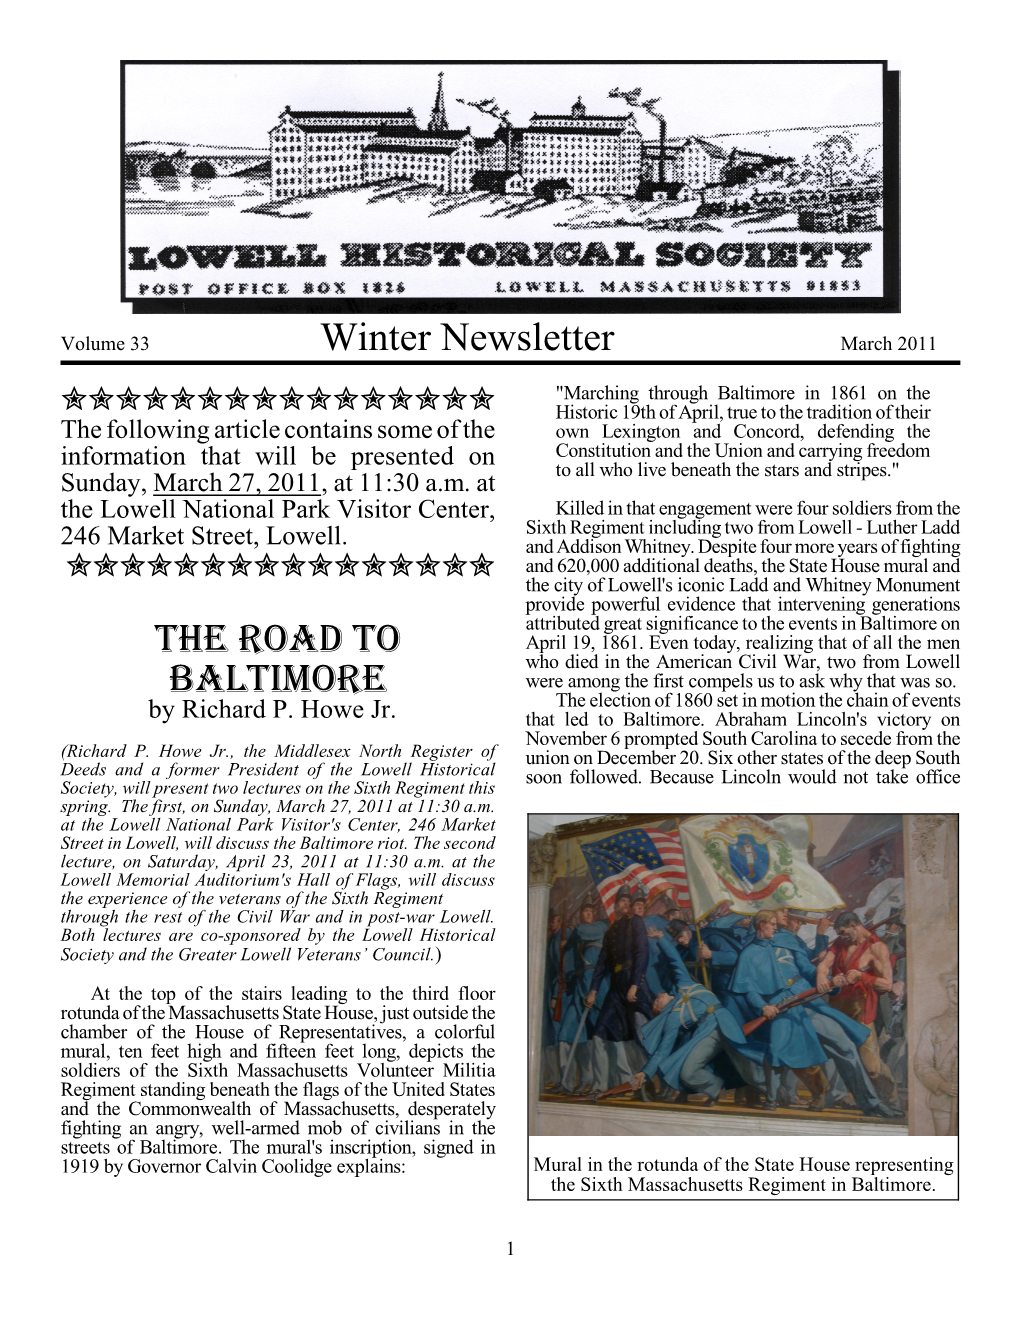 Winter Newsletter the Road to Baltimore